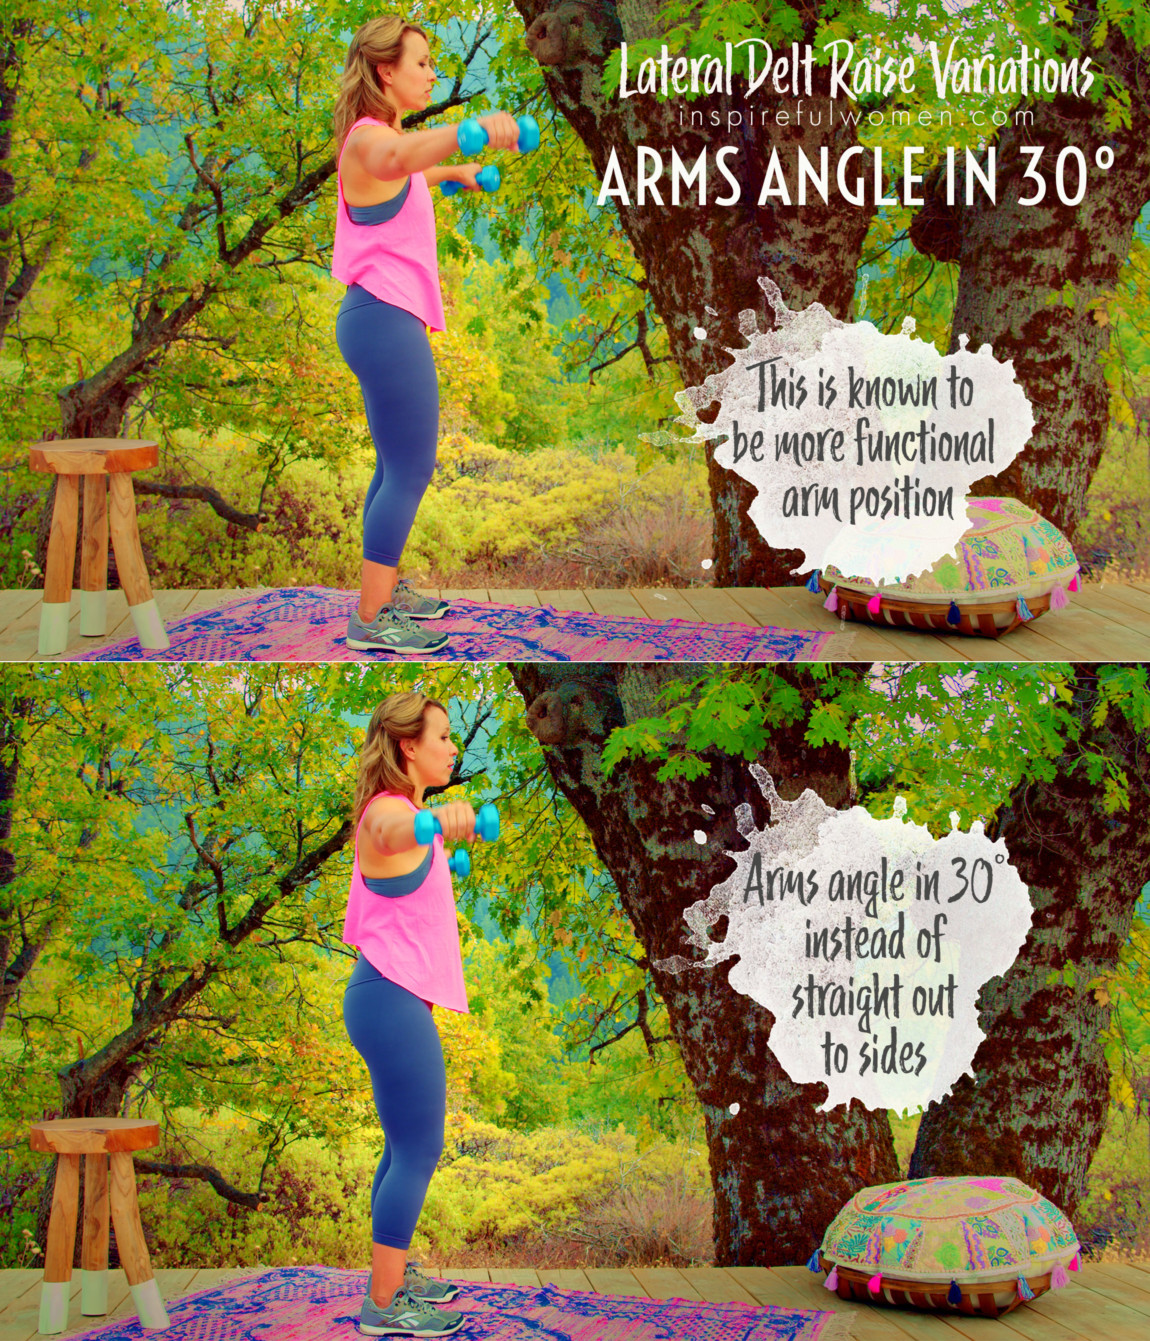 arms-angle-in-30-degrees-side-shoulder-raise-variation